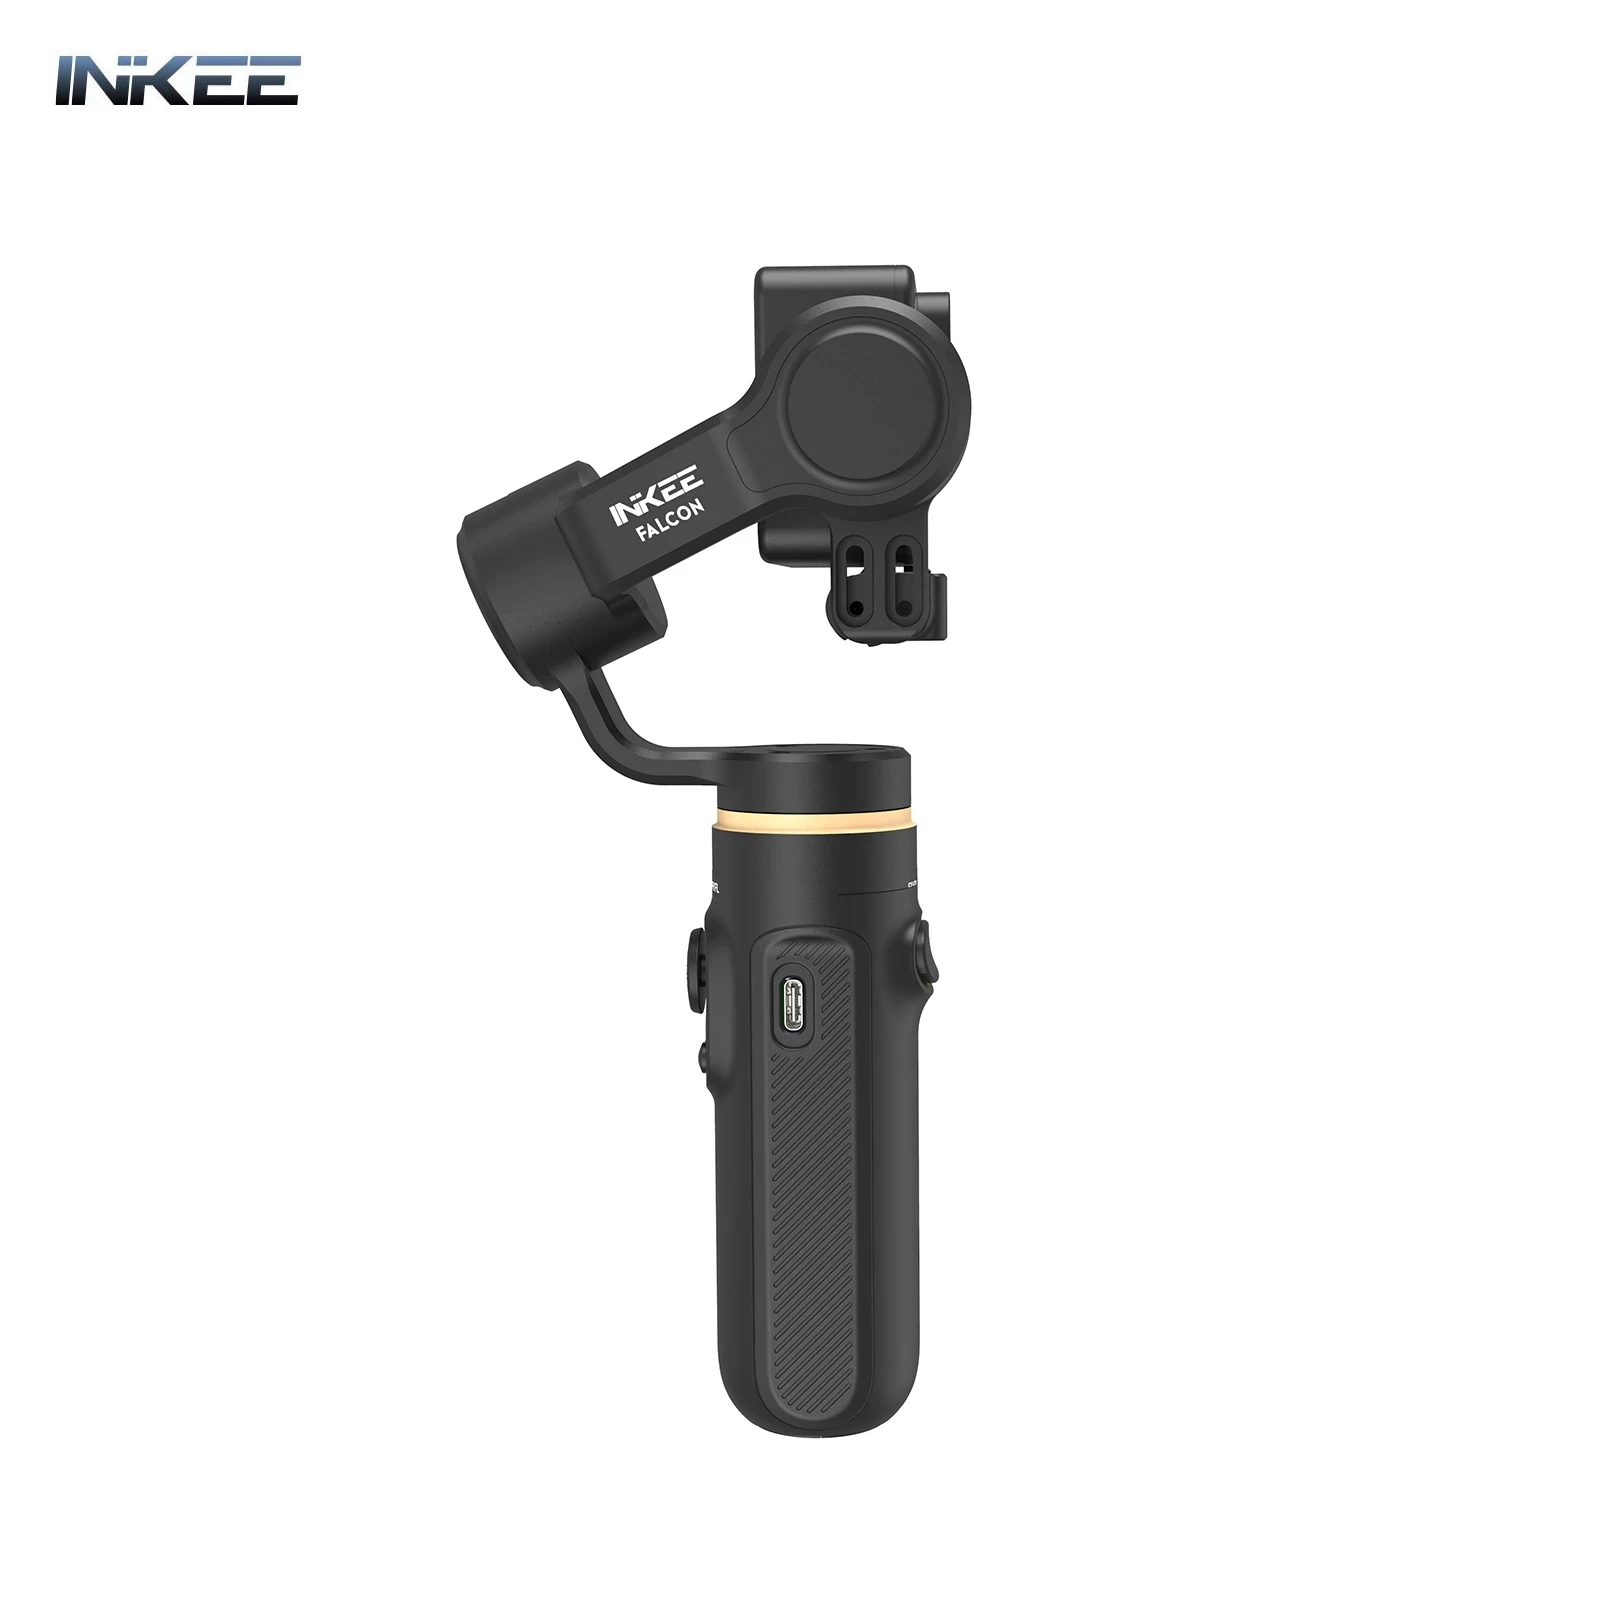 

INKEE FALCON Handheld 3-Axis Action Camera Gimbal Stabilizer Anti-Shake Wireless Control for Hero 9/8/7/6/5 OSMO Insta360